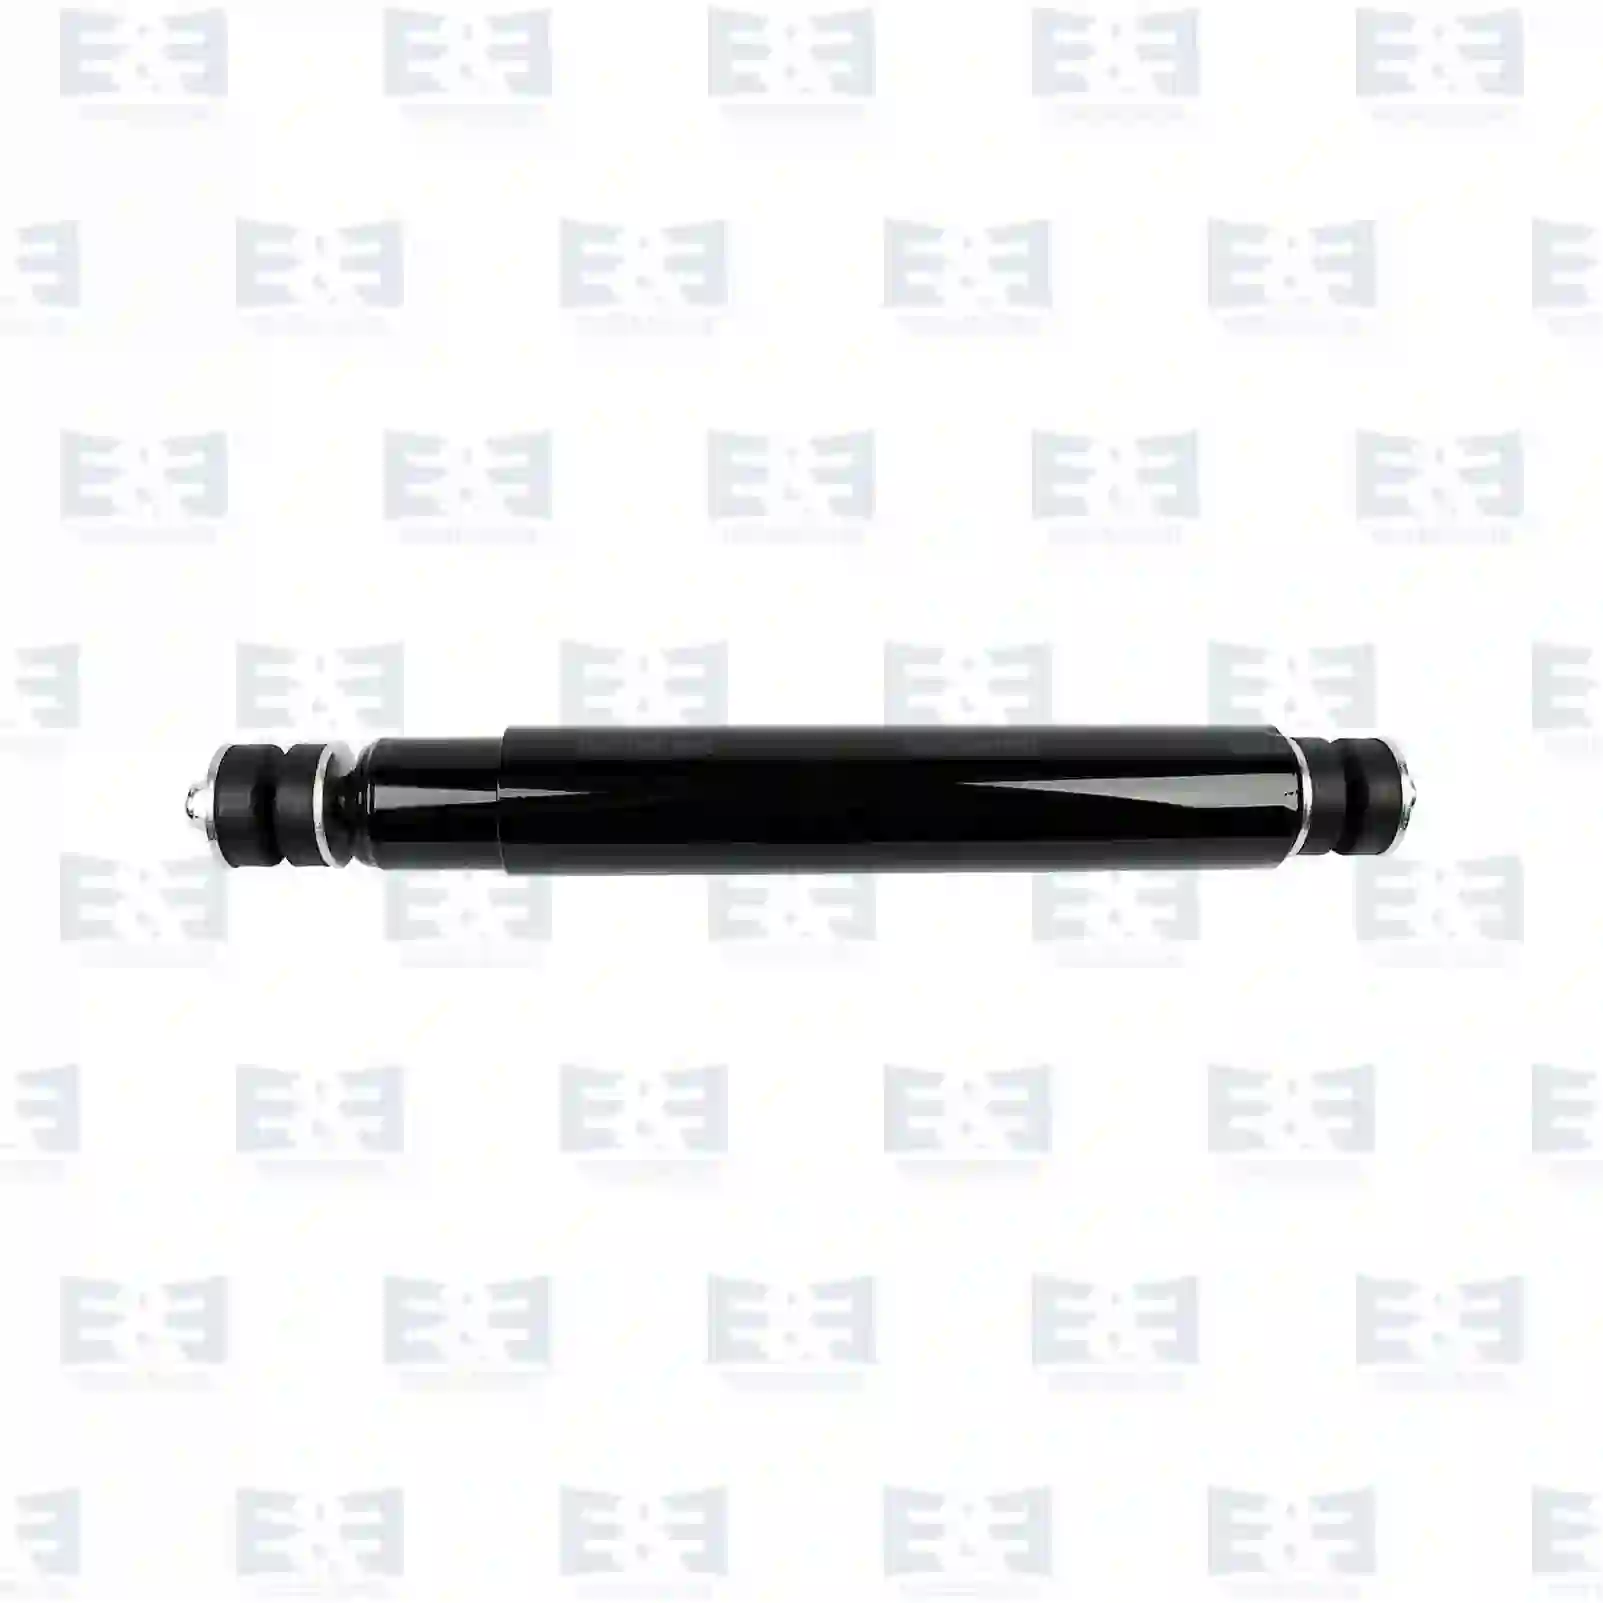 Shock Absorber Shock absorber, EE No 2E2283040 ,  oem no:642858, TAK8830, 0013265100, 0033261300, 0043263300, 0043264800, 5010095719, 1340255, 1342788, 1381810, 1481715, 20900142, 328111 E&E Truck Spare Parts | Truck Spare Parts, Auotomotive Spare Parts